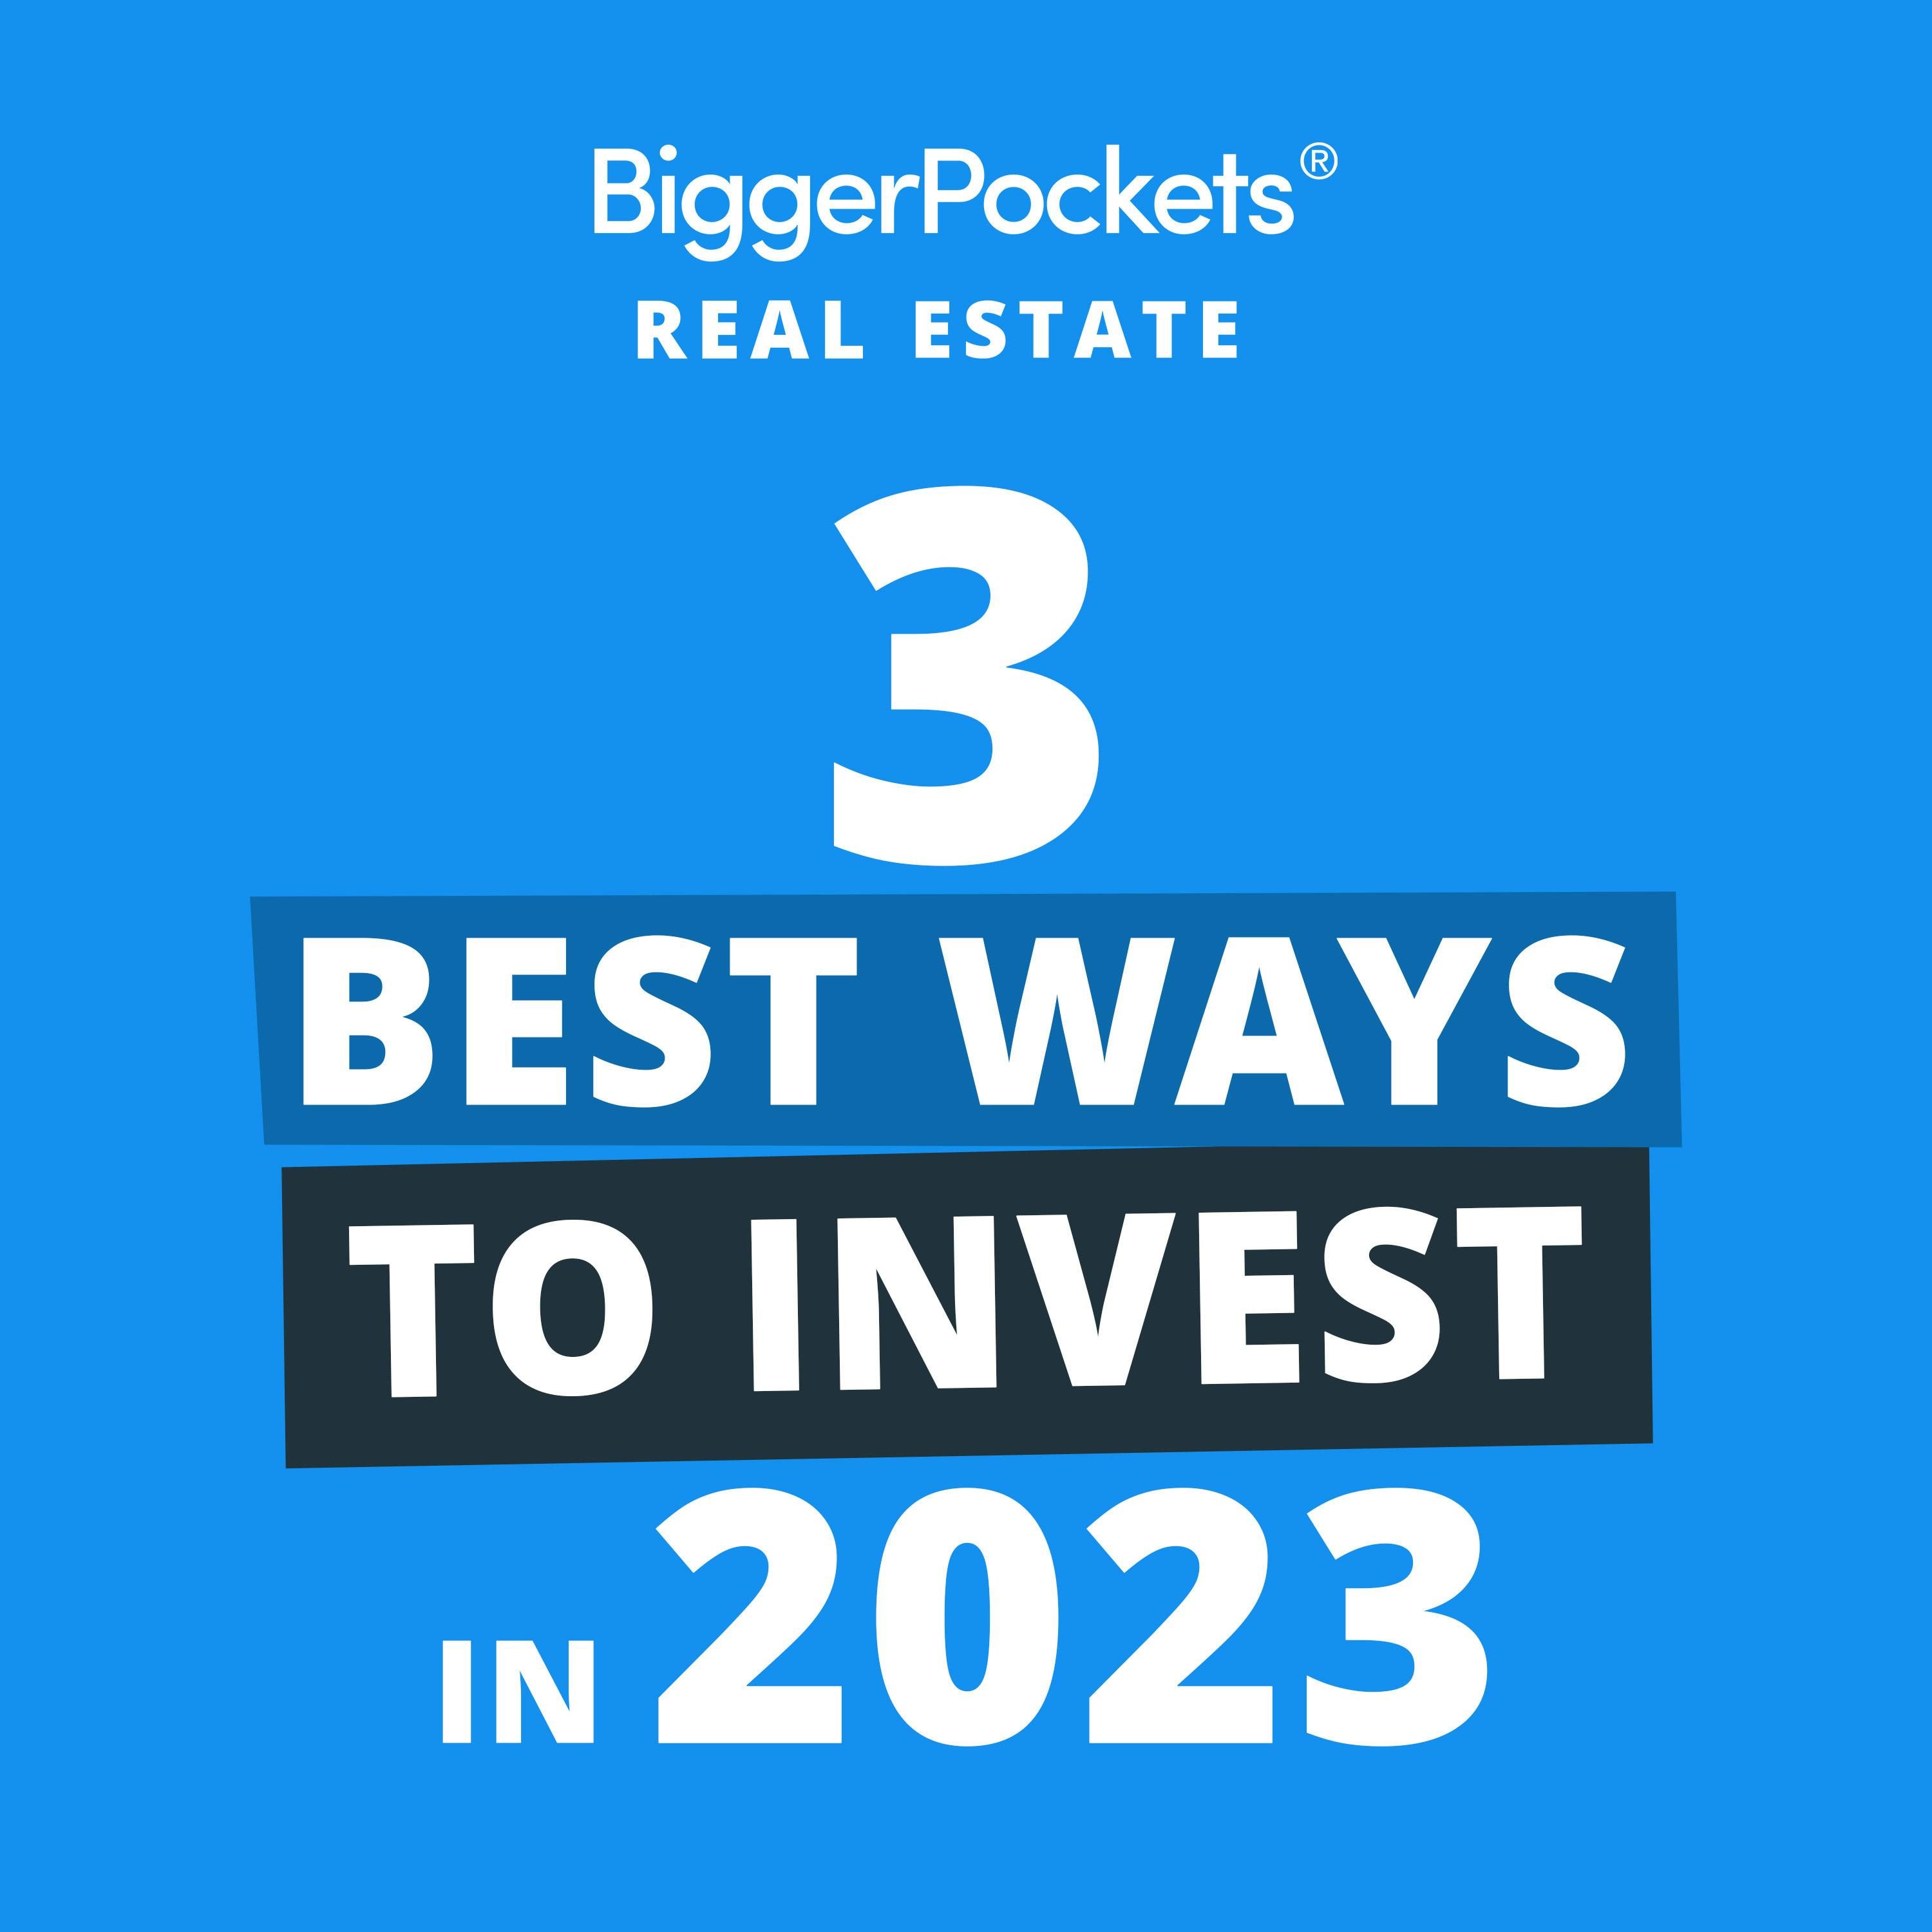 718: BiggerNews: The State of Real Estate in 2023 and 3 Ways to Beat a Bear Market